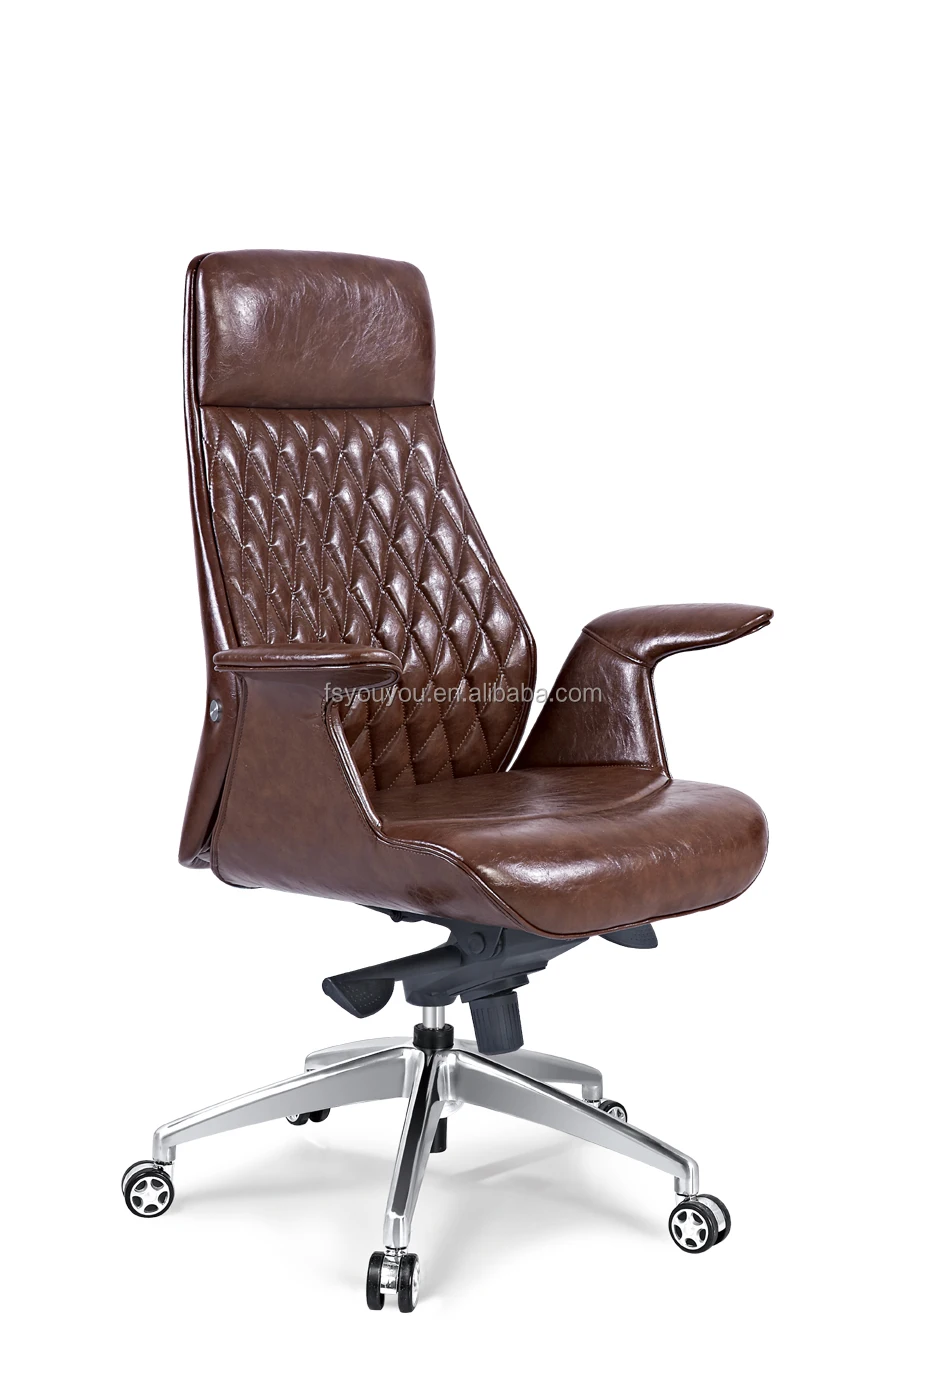 Black Leather With Mesh Office Chair Ergonomic Executive Upholstered